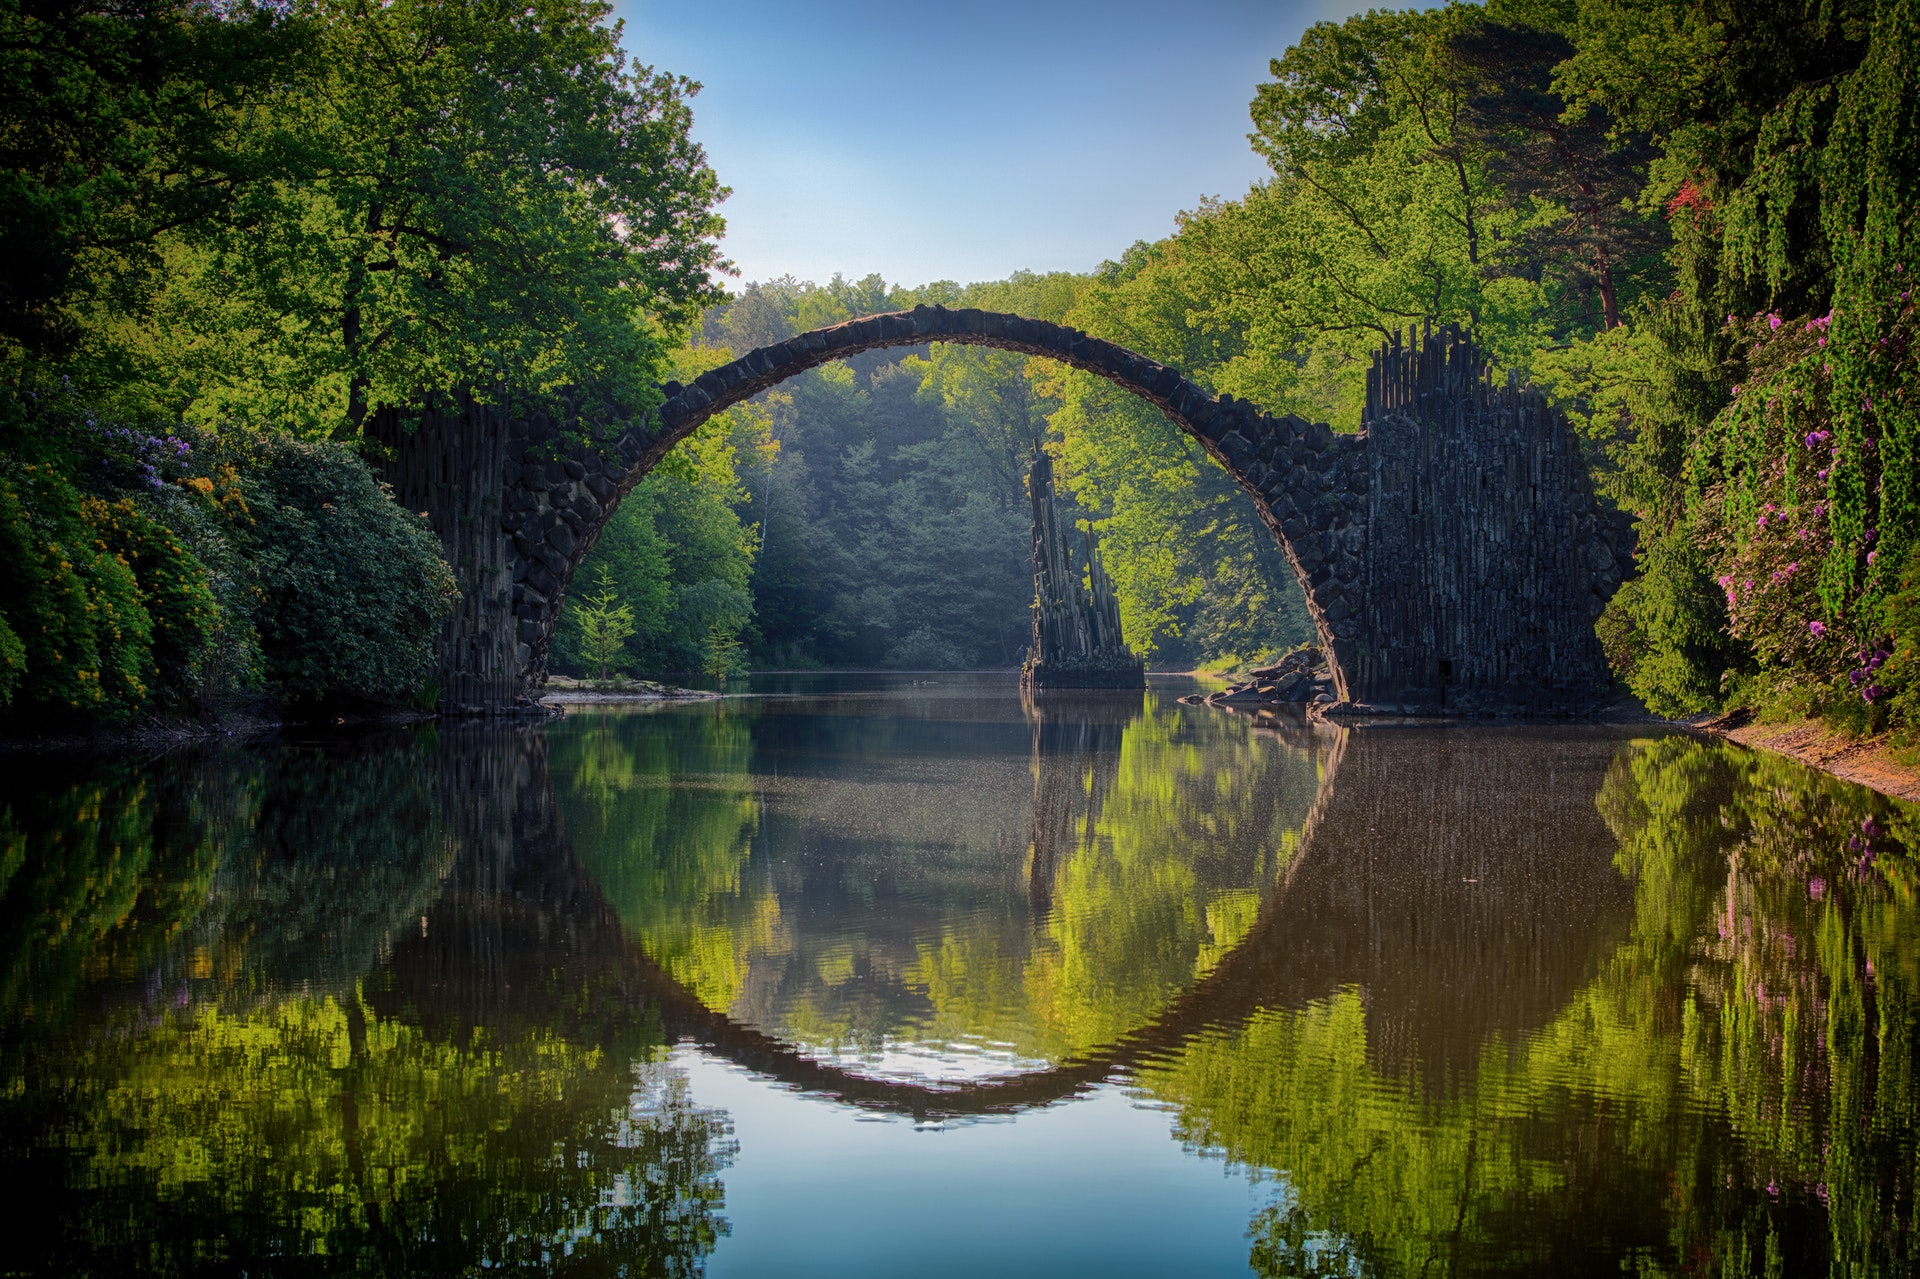 Photo of a stone bridge over a smooth river surrounded by trees